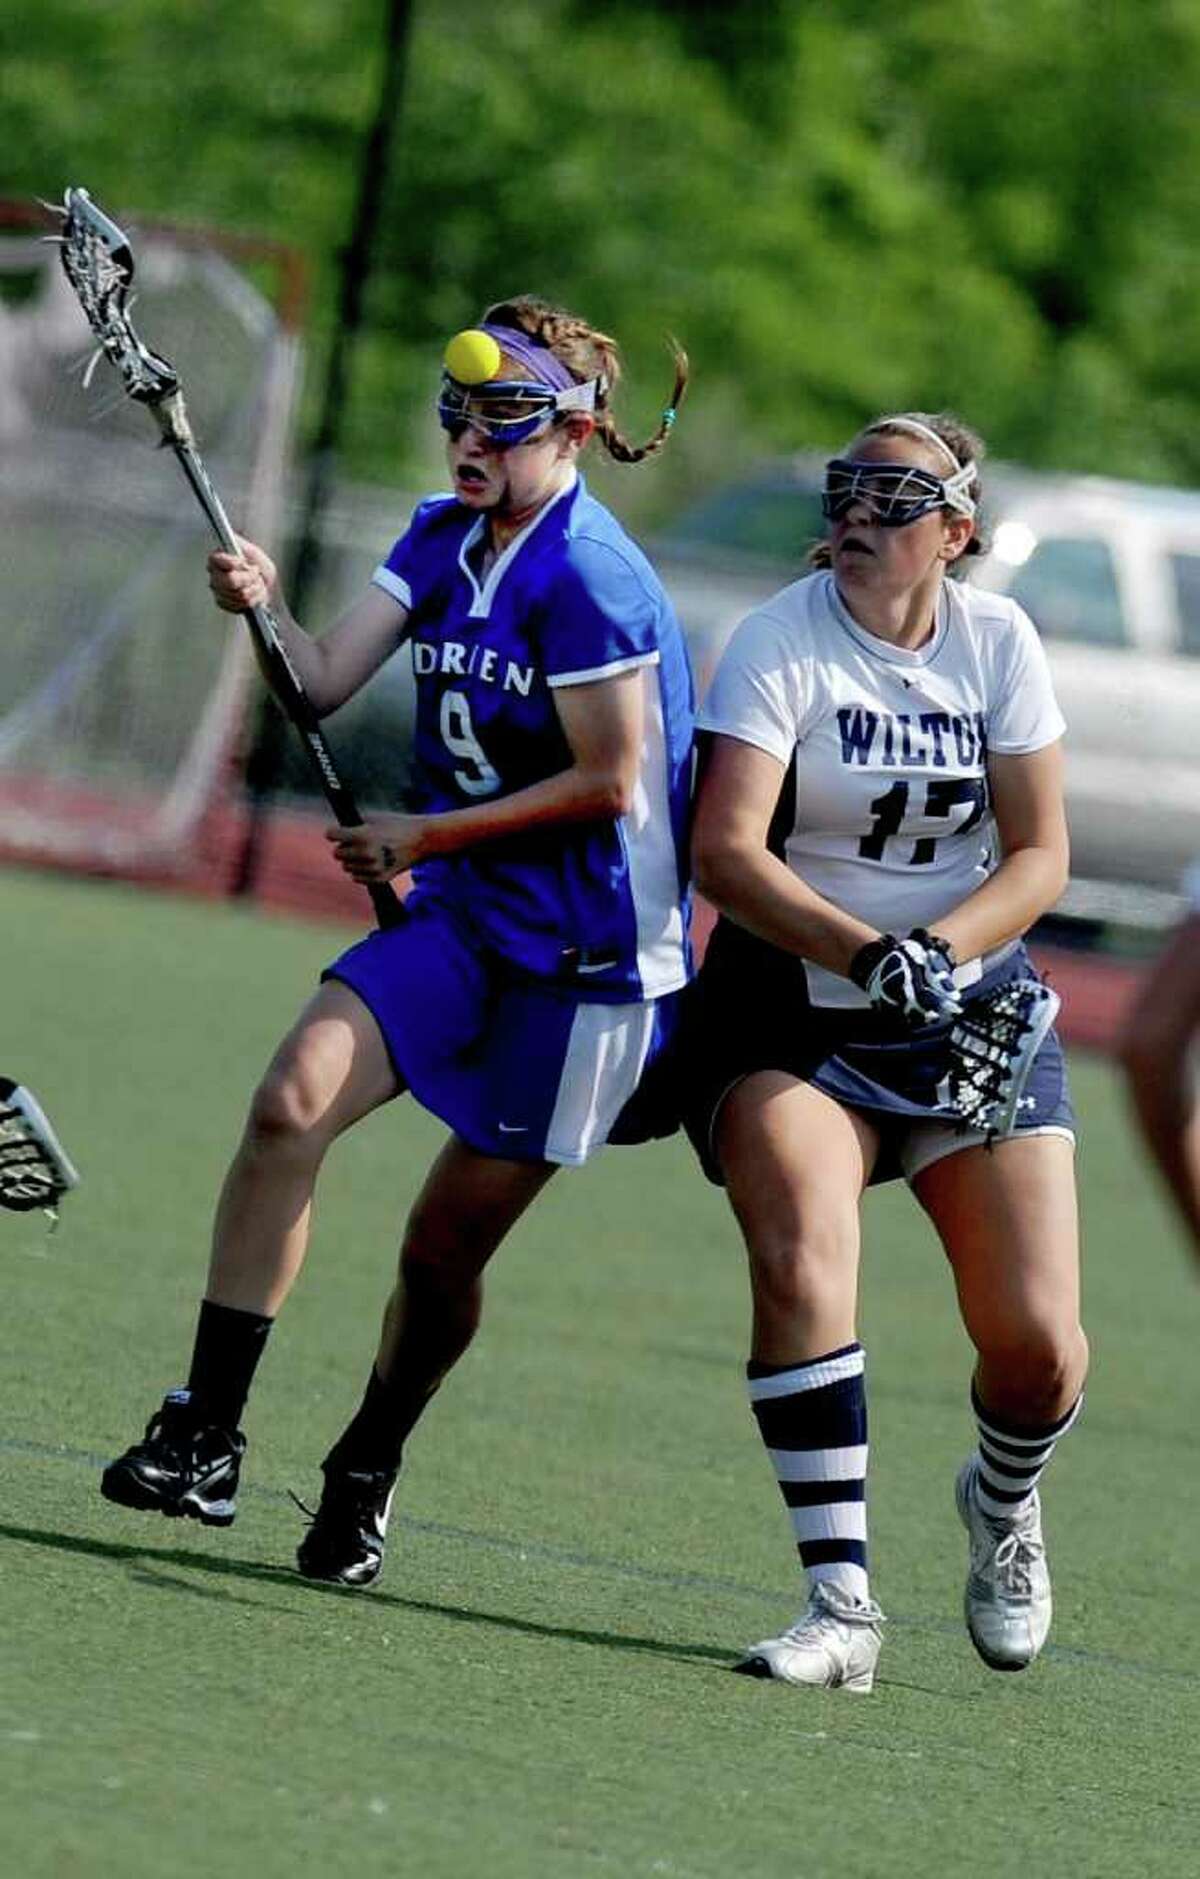 Darien's Emma Stein, left, and Wilton's Liz Reda, right, compete for control of the ball during Friday's FCIAC final at Brien McMahon High School in Norwalk on May 28, 2011.